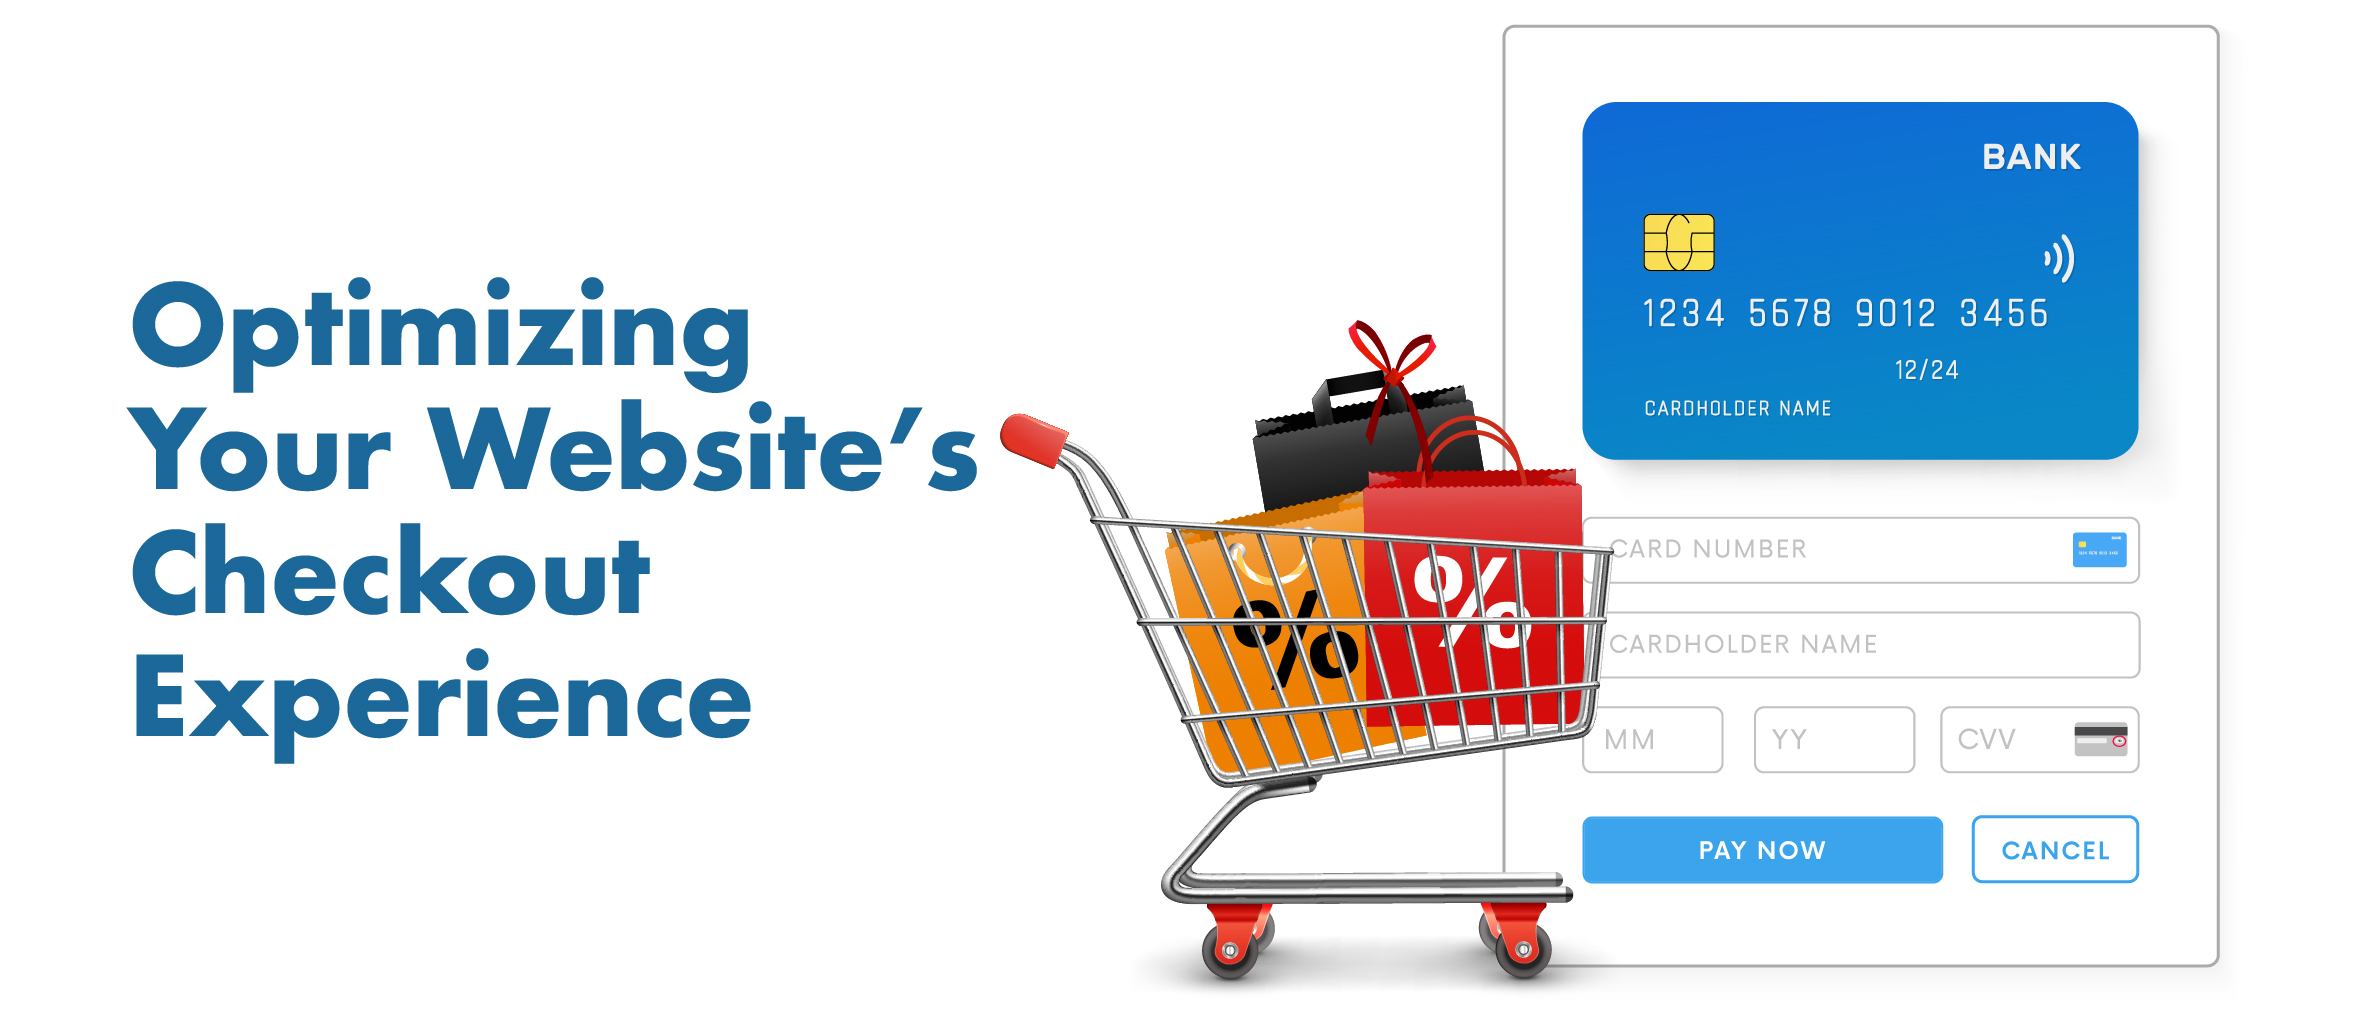 Optimizing Your Website’s Checkout Experience to Reduce Cart Abandonment